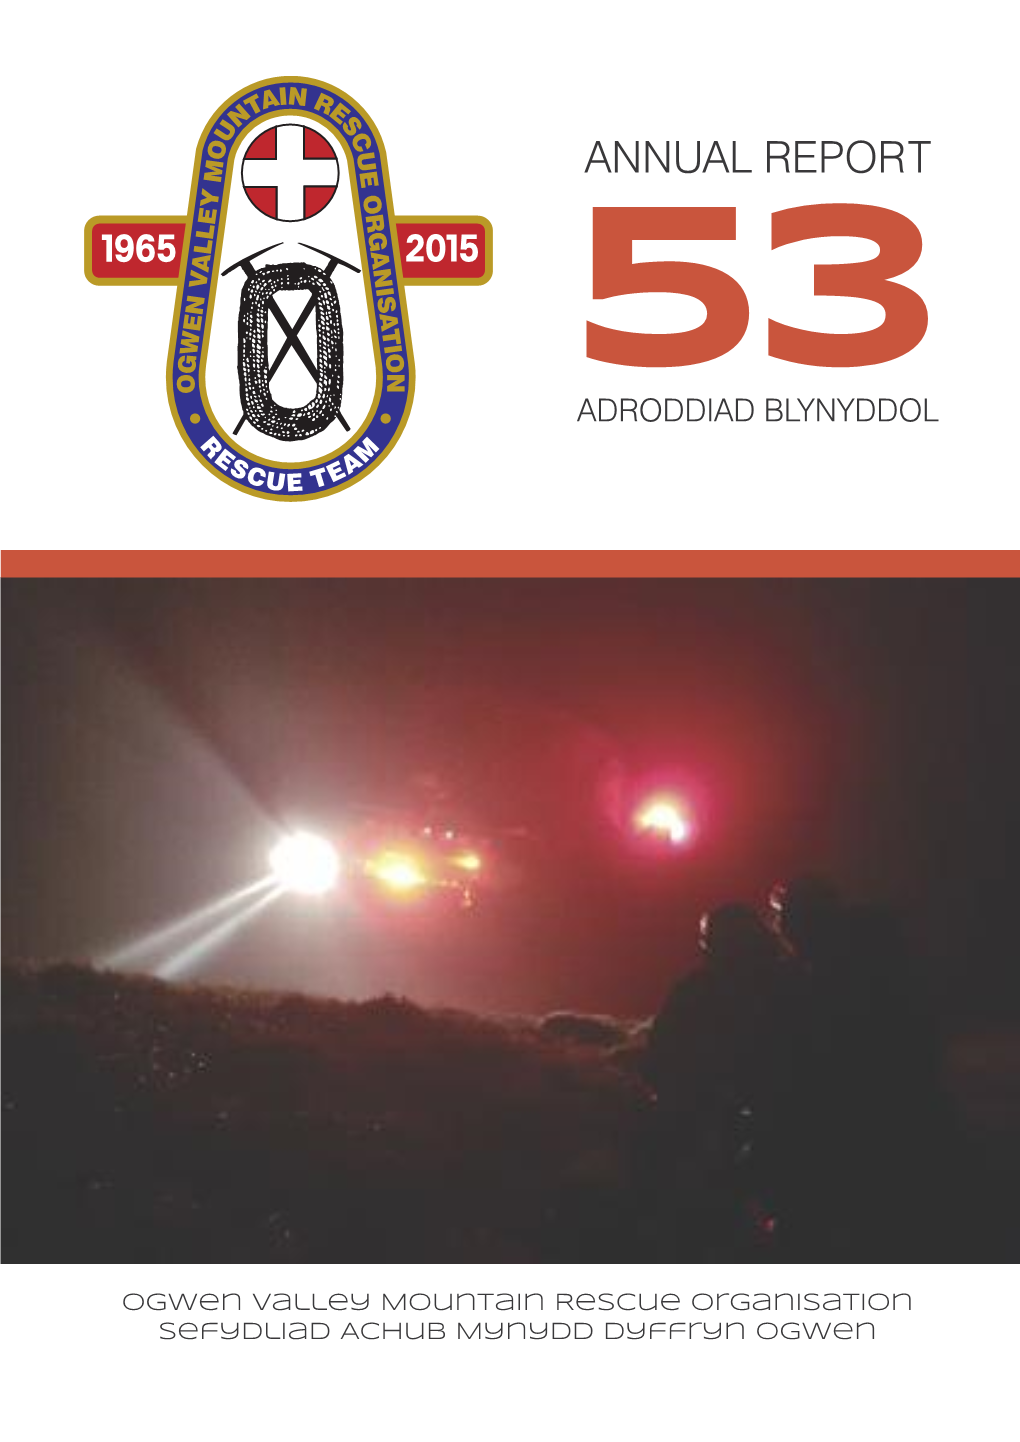 ANNUAL REPORT for the Royal Air Force Mountain Rescue Service AS the NEW TL at RAF Kinloss As a Part-Time Troop